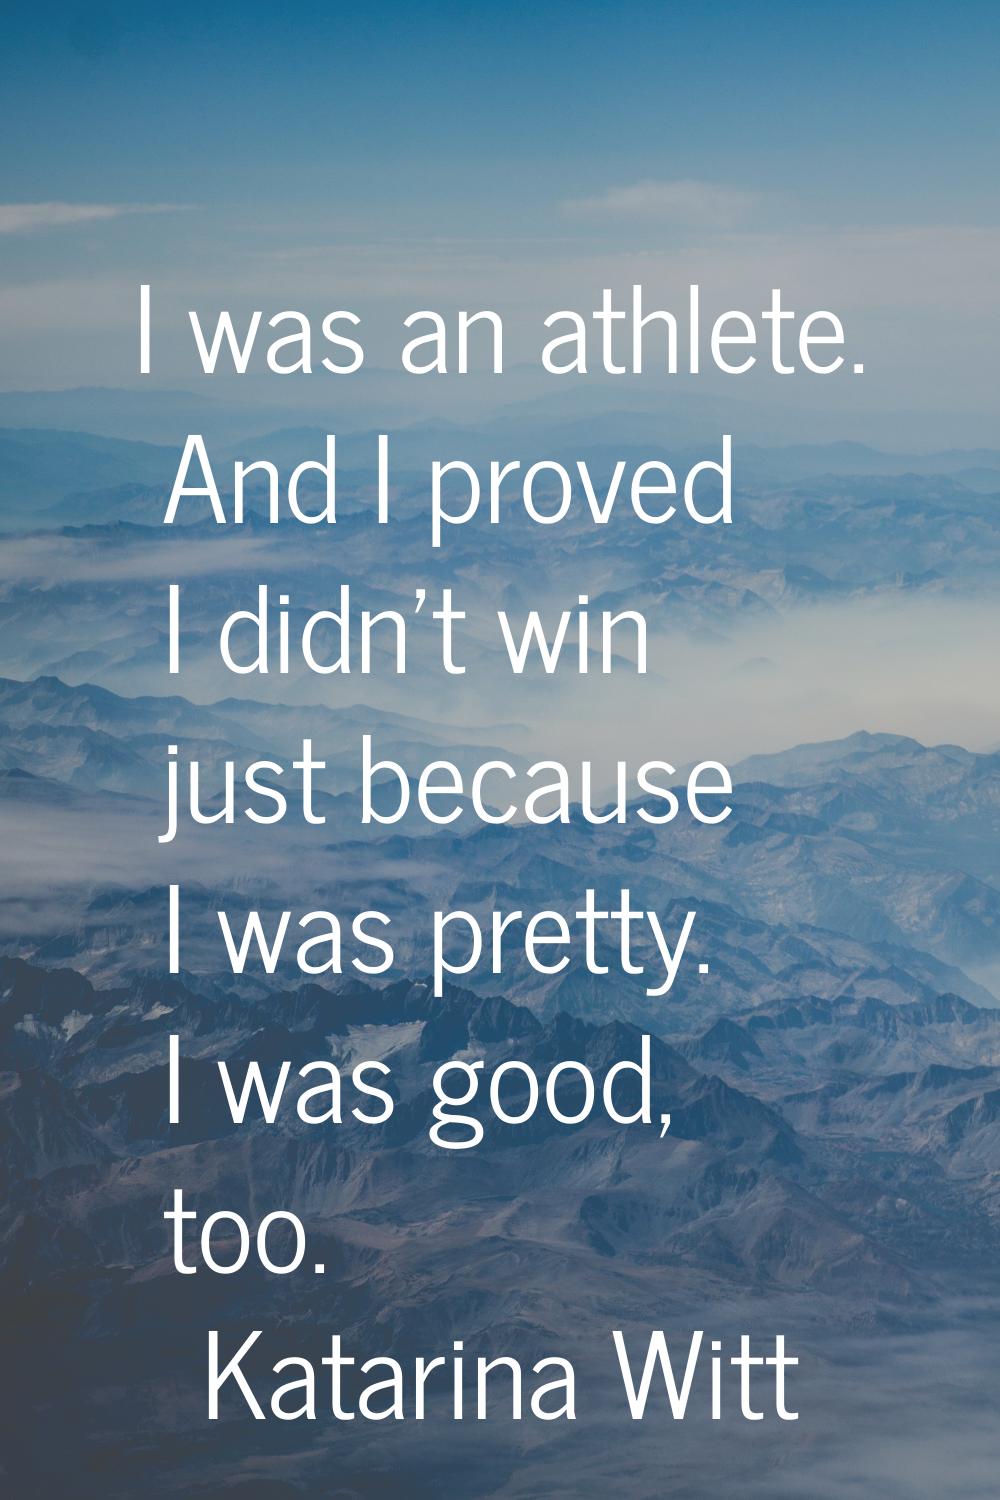 I was an athlete. And I proved I didn't win just because I was pretty. I was good, too.